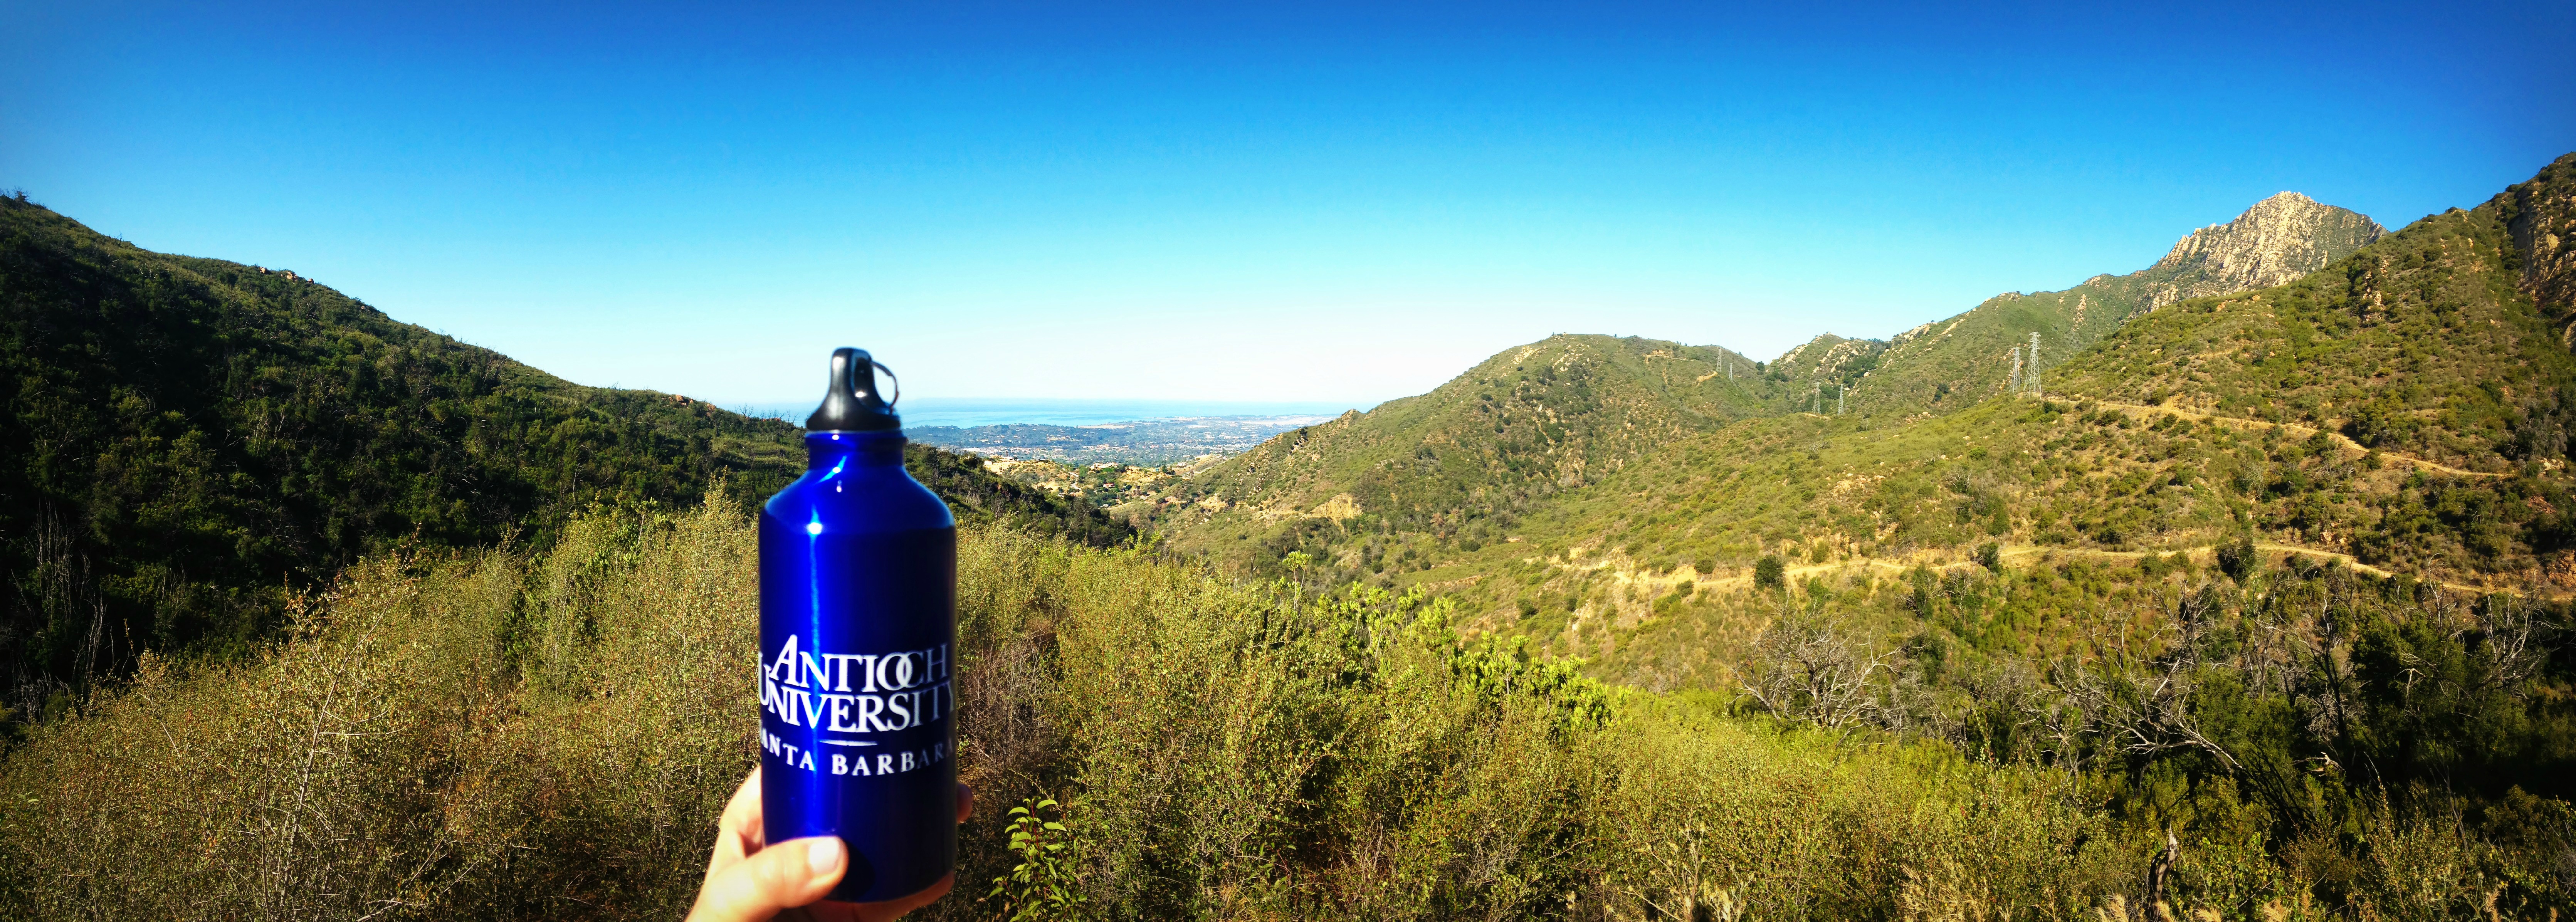 "Keeping my daily routine eco-friendly while enjoying the scenic view from Mission Canyon." -Kari Jensen